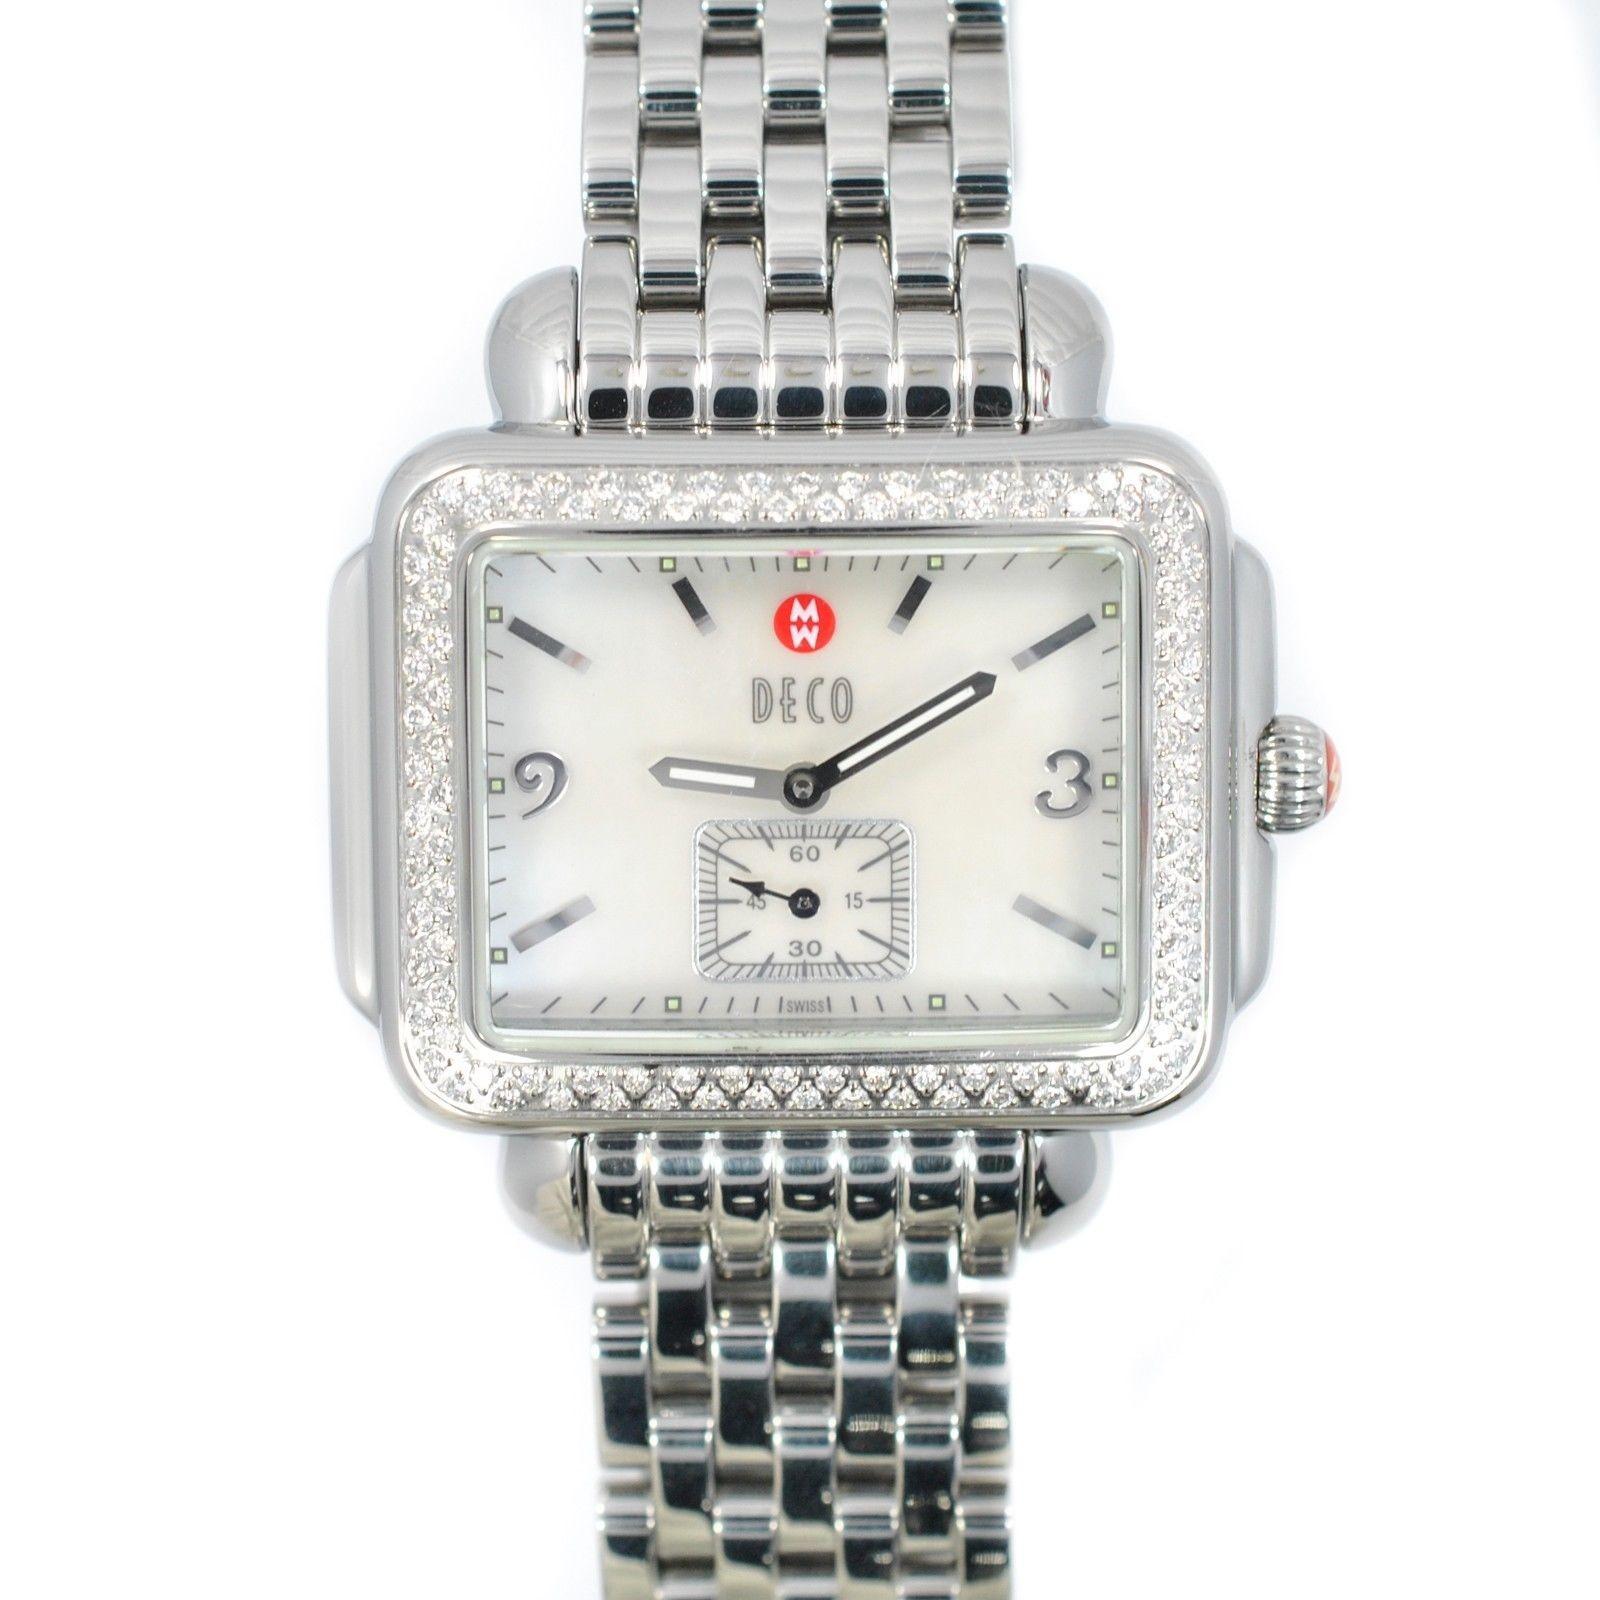 Michele Deco Mw06C01 w/ 6.5 mm Band, Stainless-Steel Bezel & Mother-Of-Pearl Dia